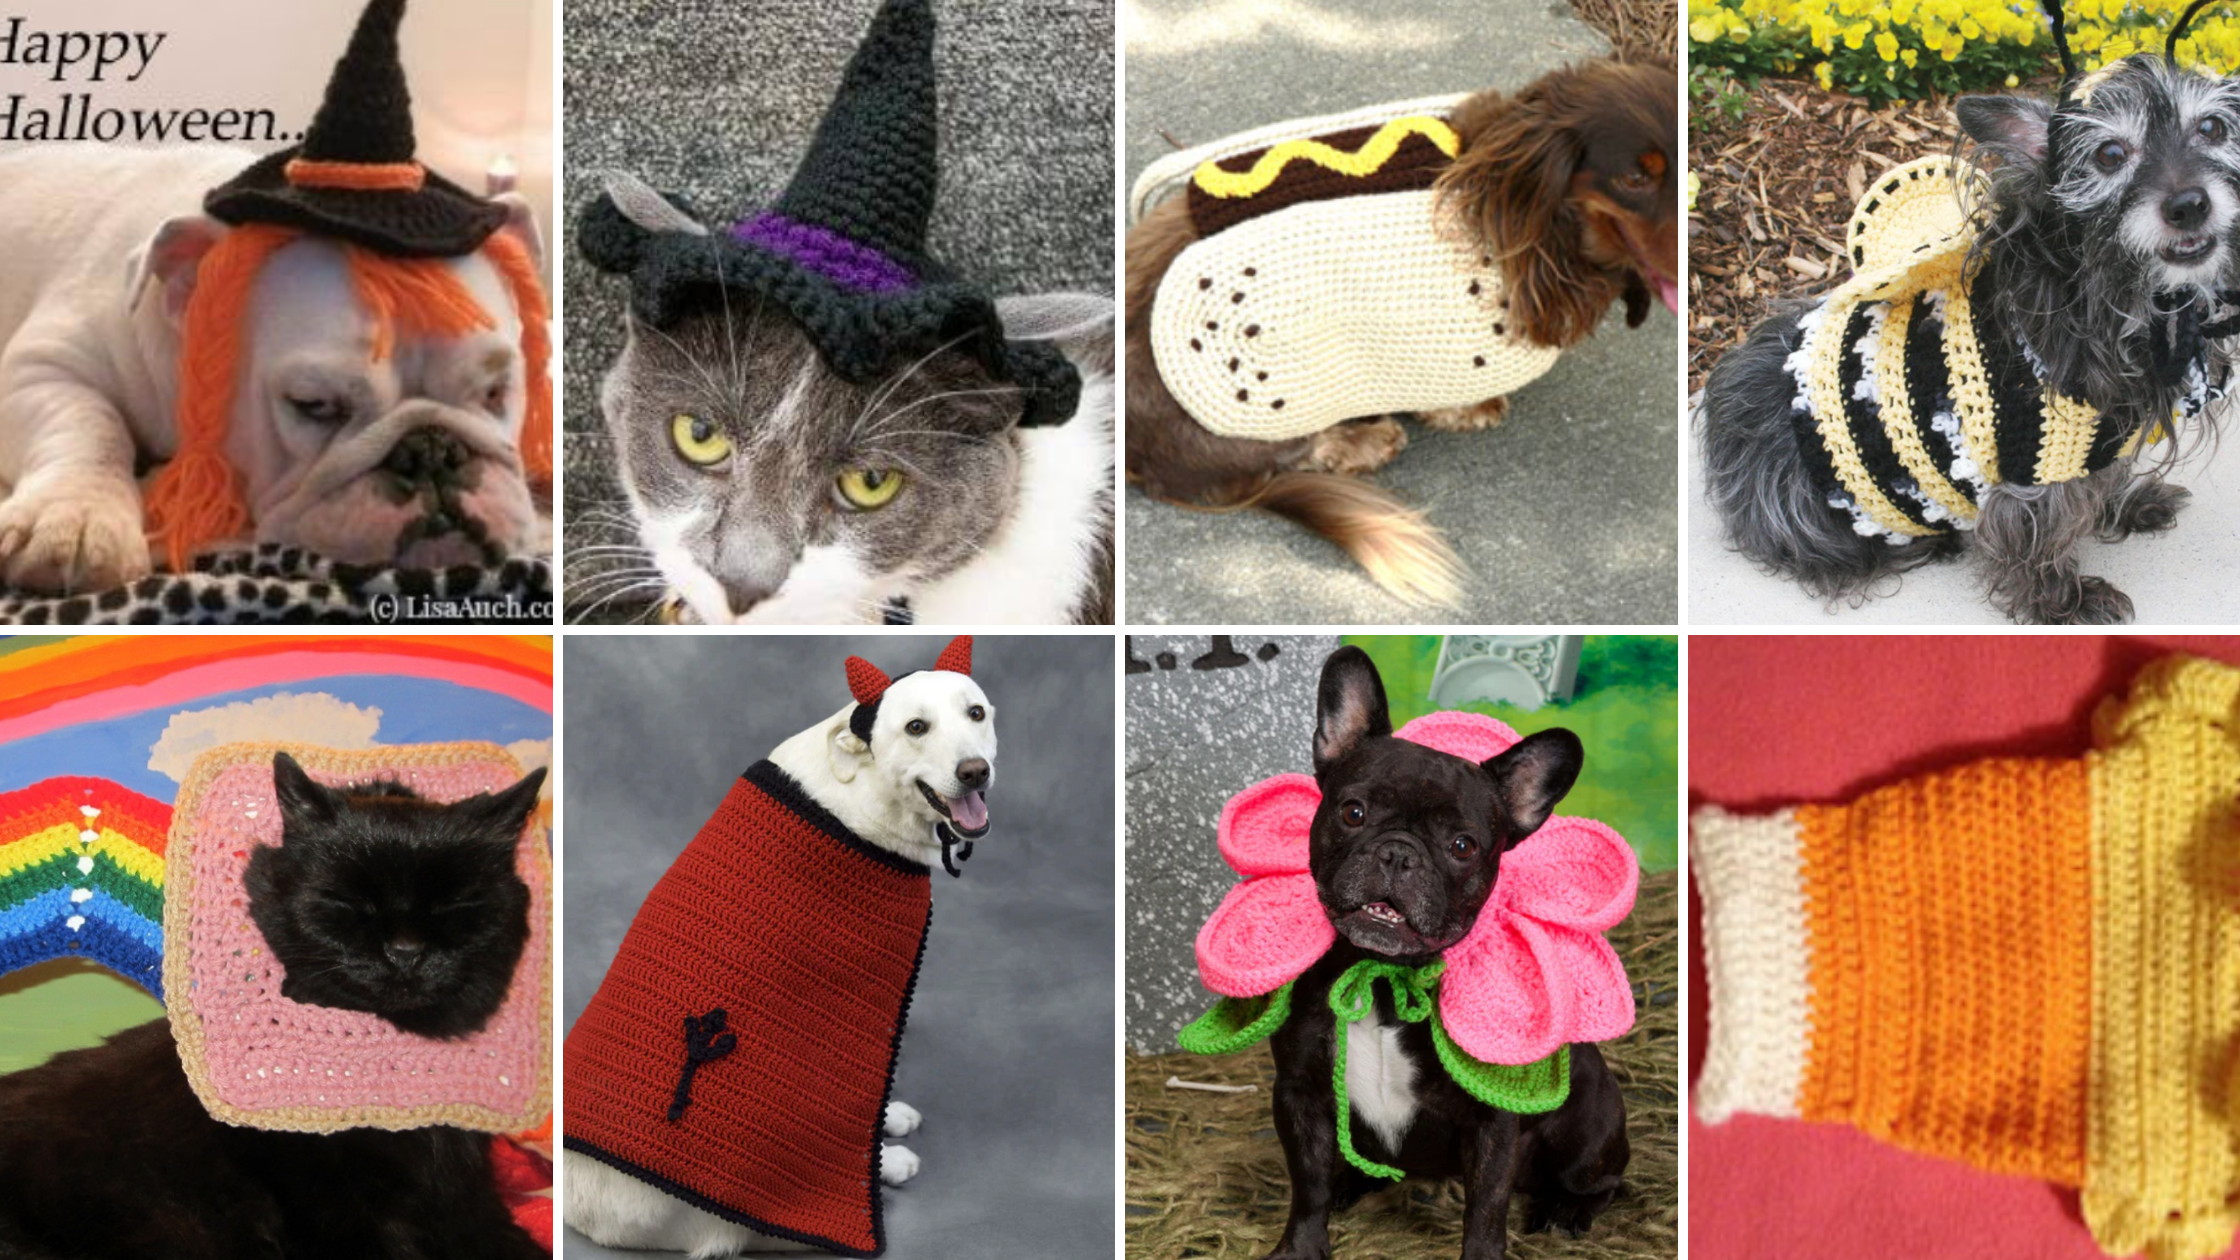 Which Halloween Pet Costume Would You Make?